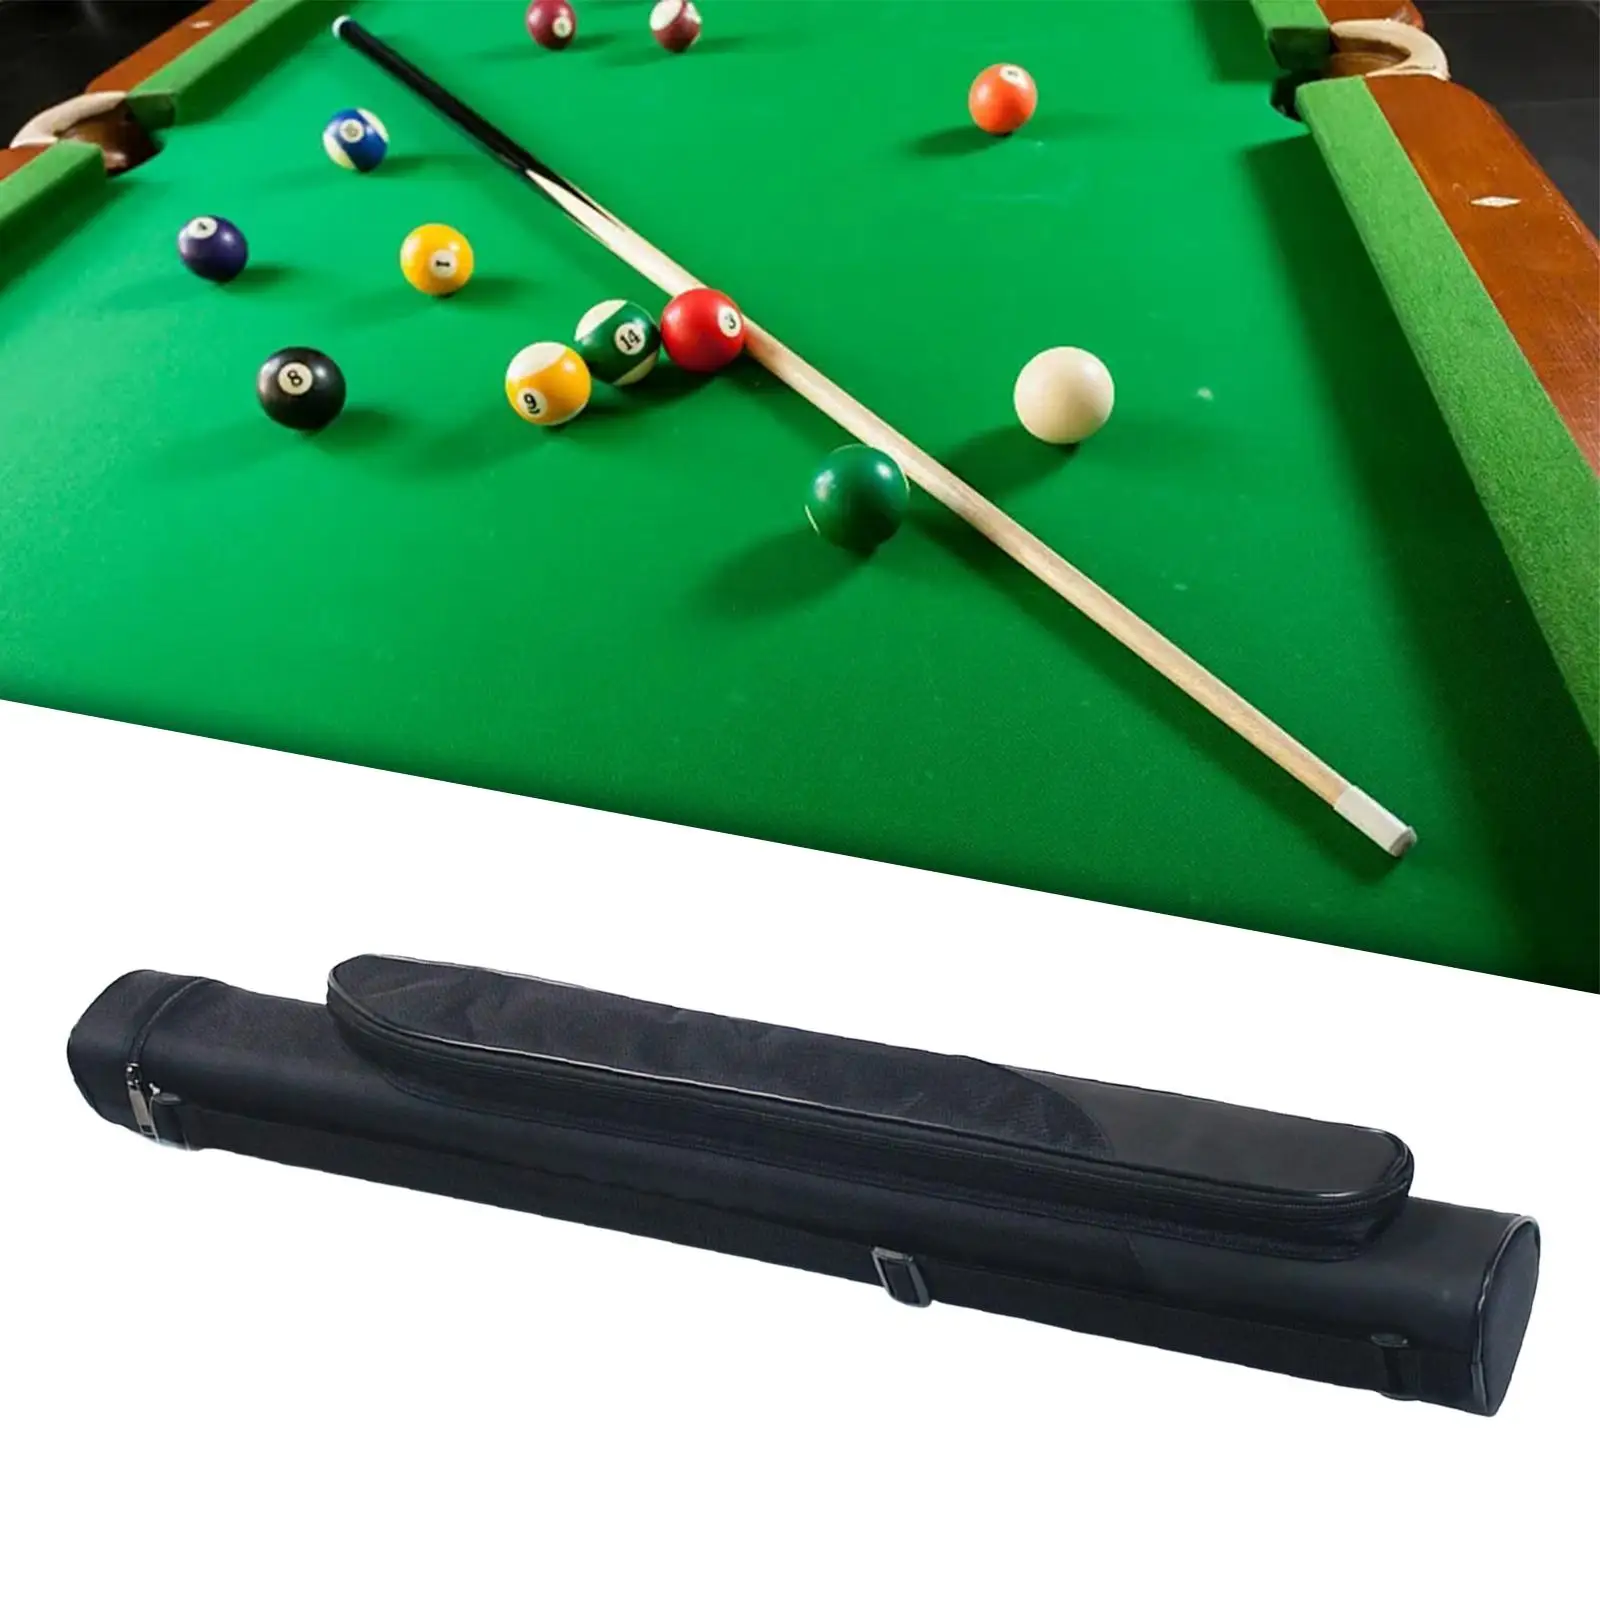 Pool Cue Cases Durable Lightweight with Shoulder Strap Container 4 Holes Billiard Pool Cue Stick Carrying Bag Pool Cue Carrier